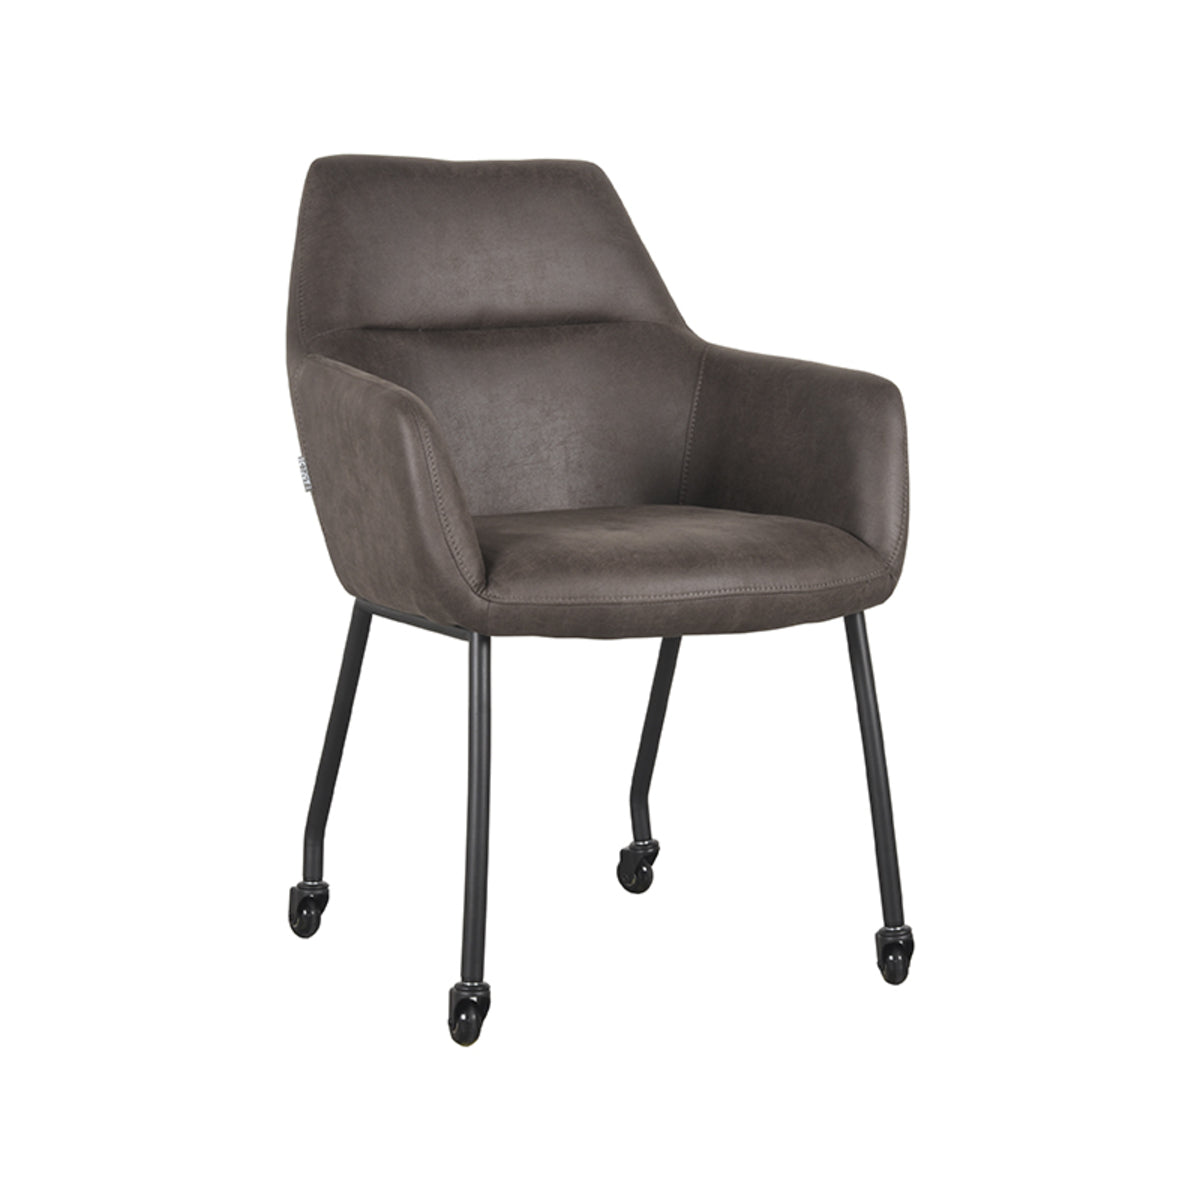 LABEL51 Dining room chair Lenny - Anthracite - Microfiber | 2 pieces